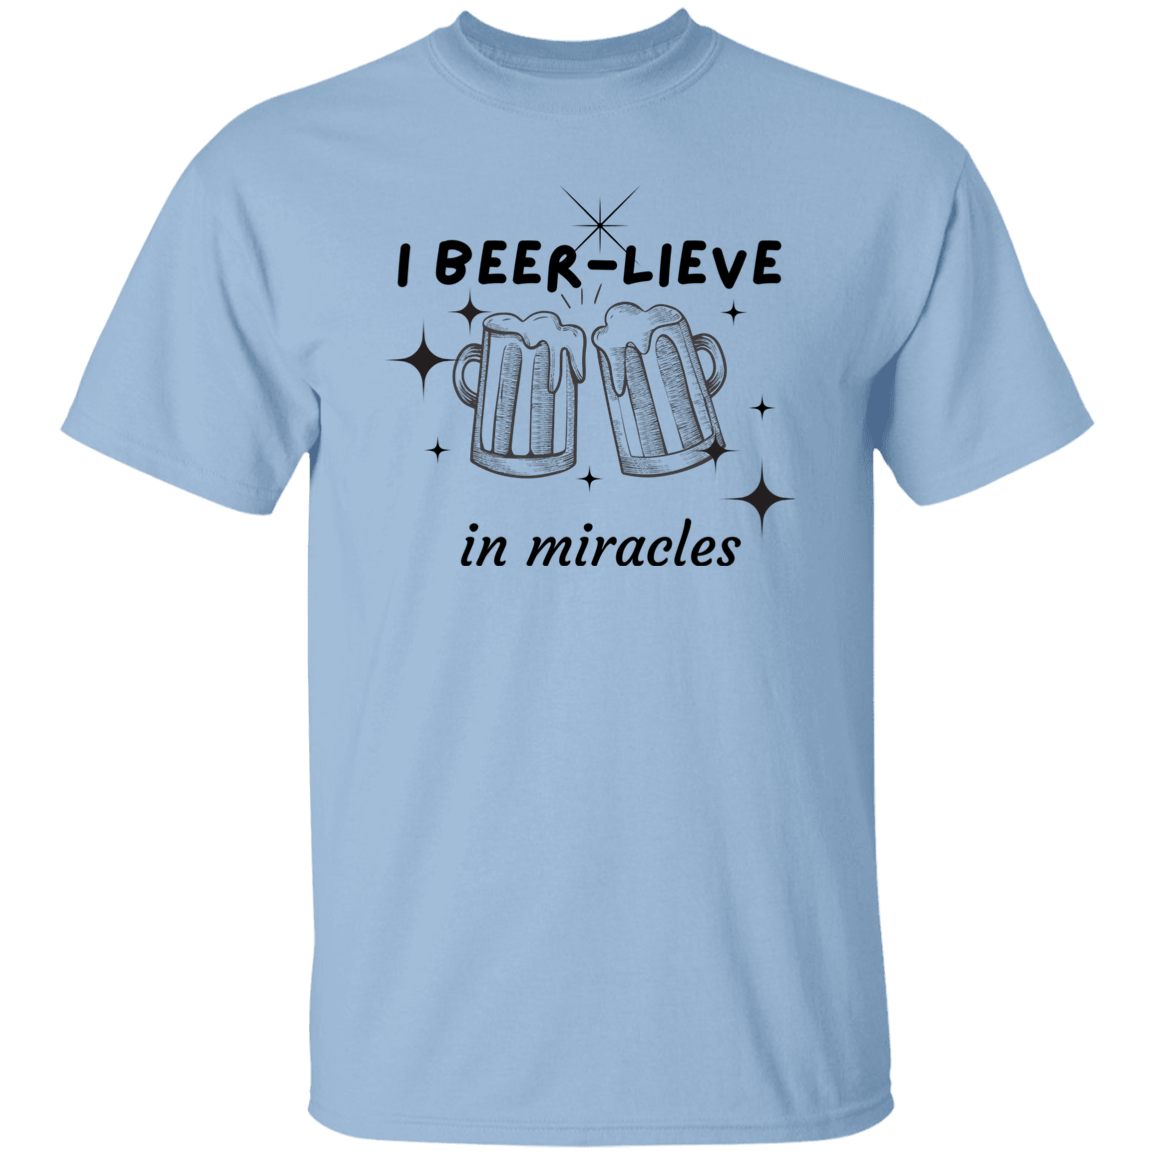 I Beer lieve T-Shirt